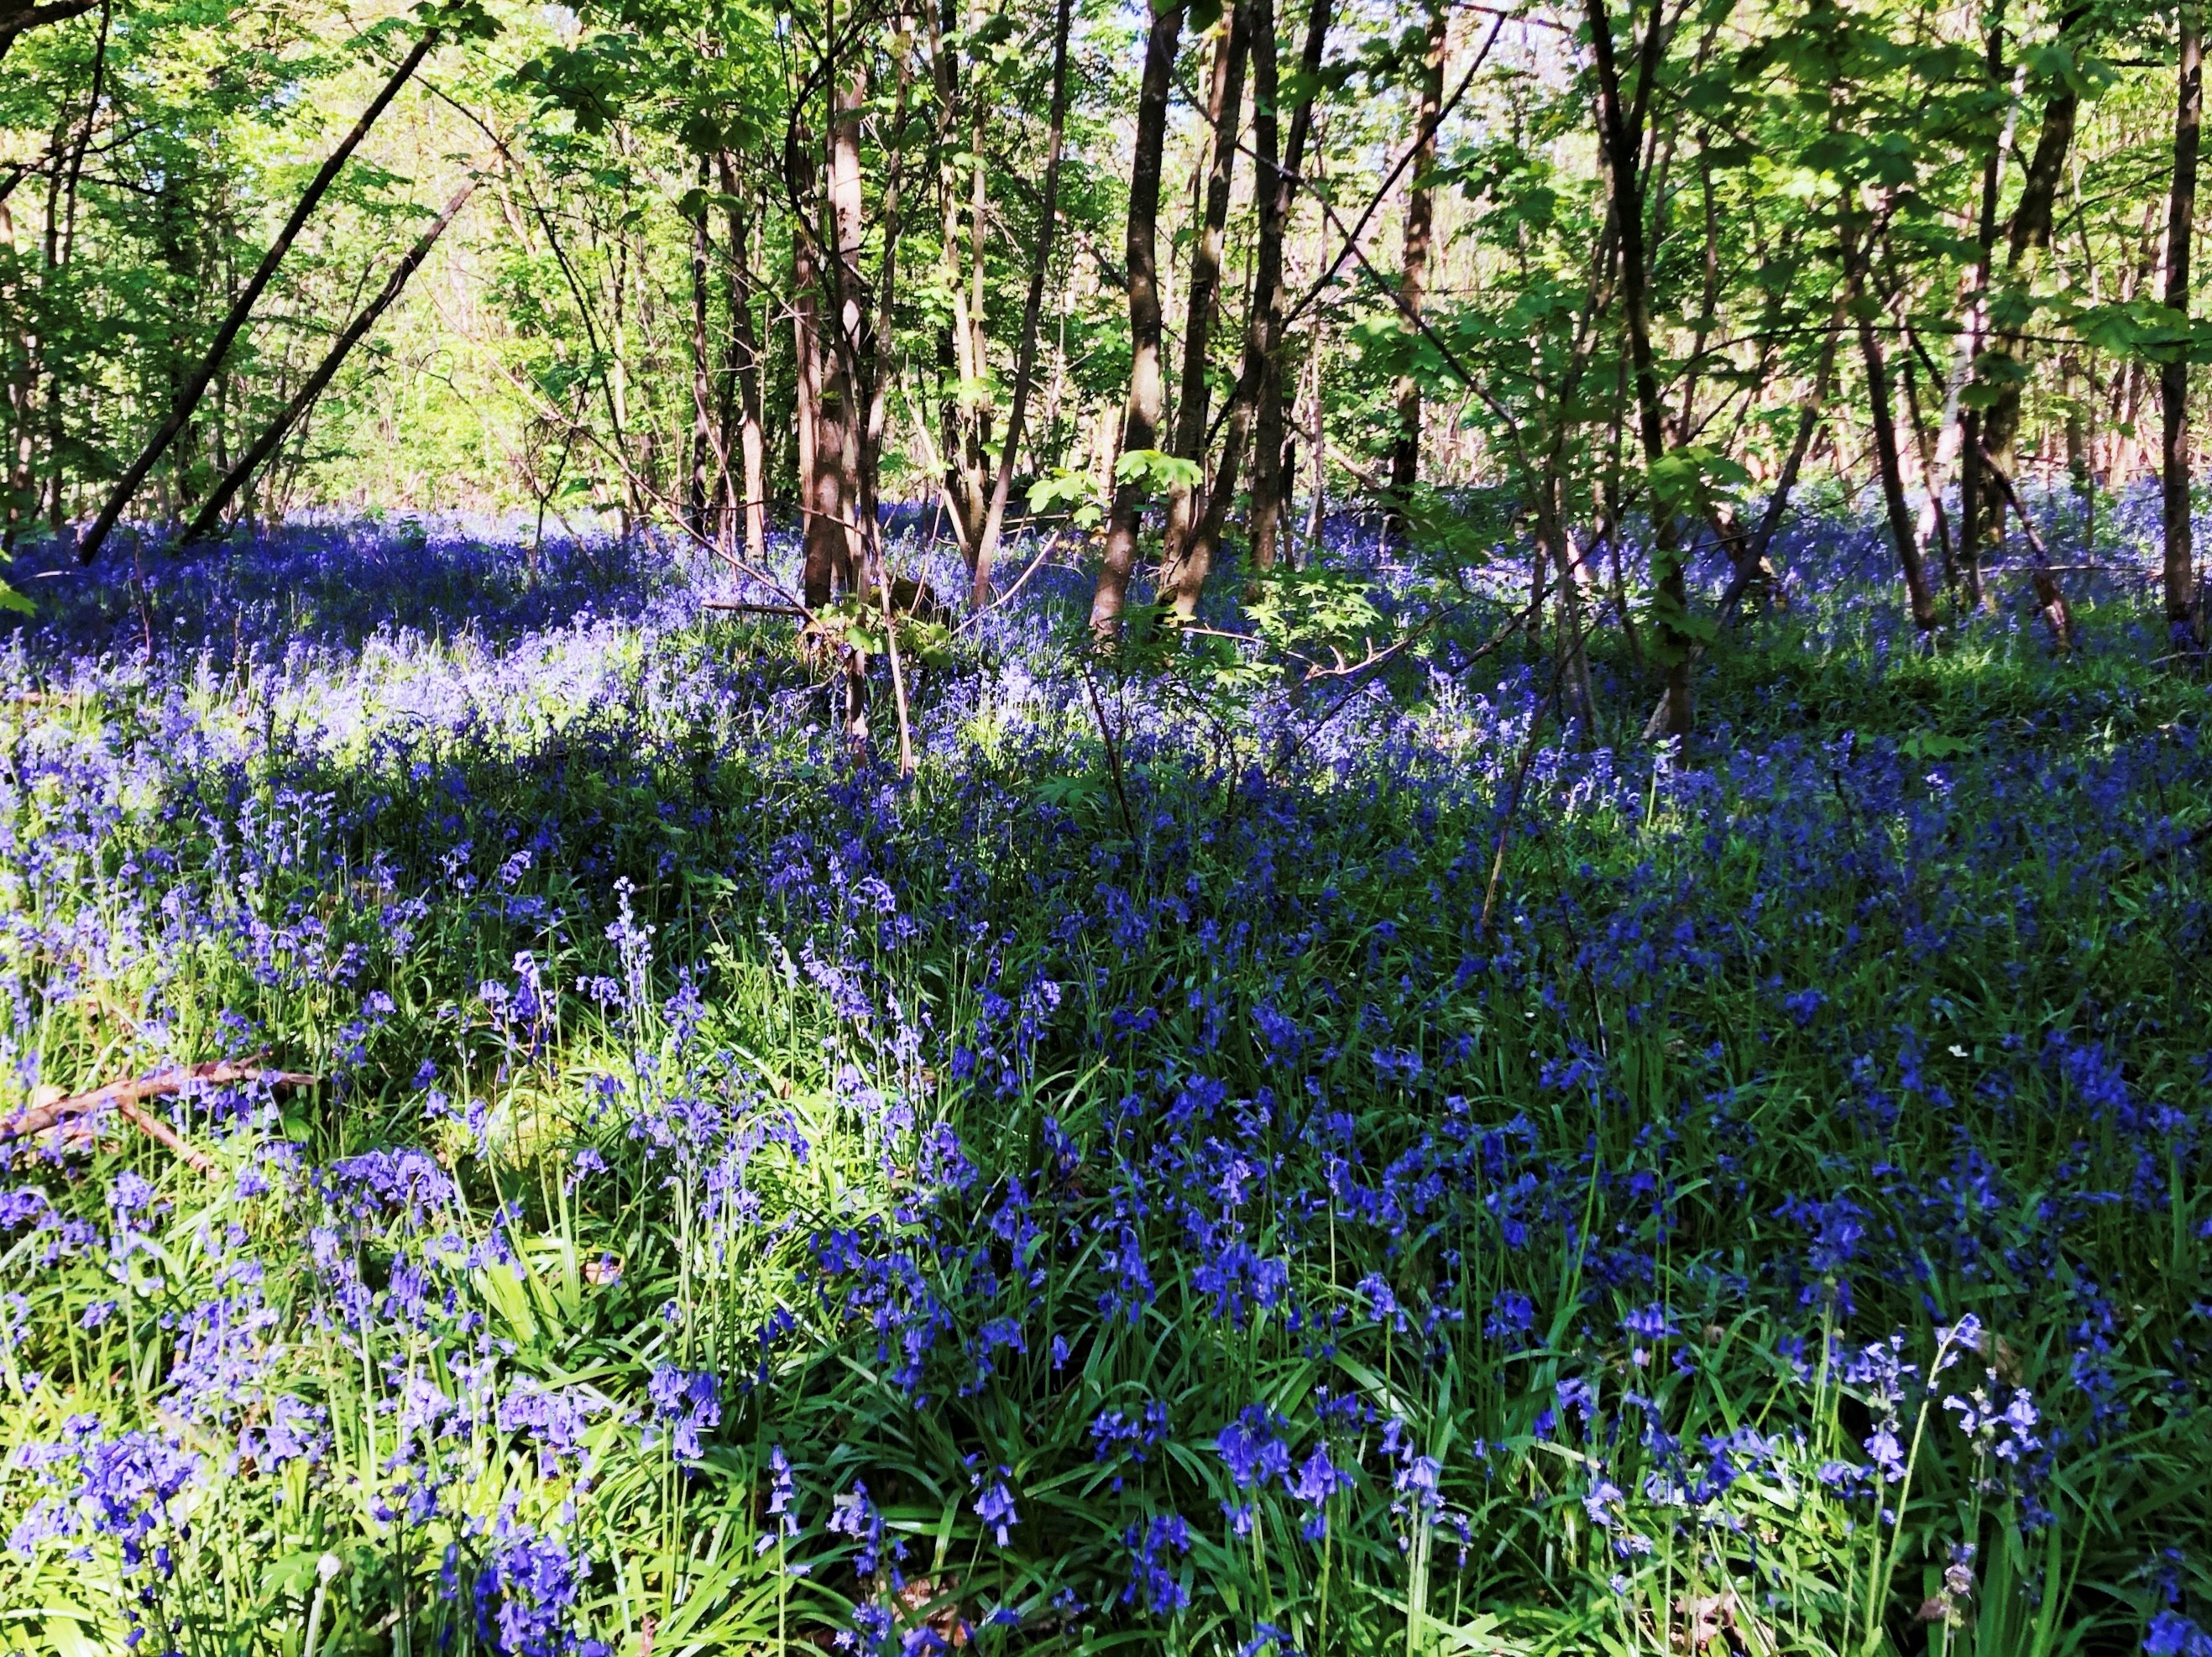 A meadow of bluebells, partly shaded by a forrest of small trees behind